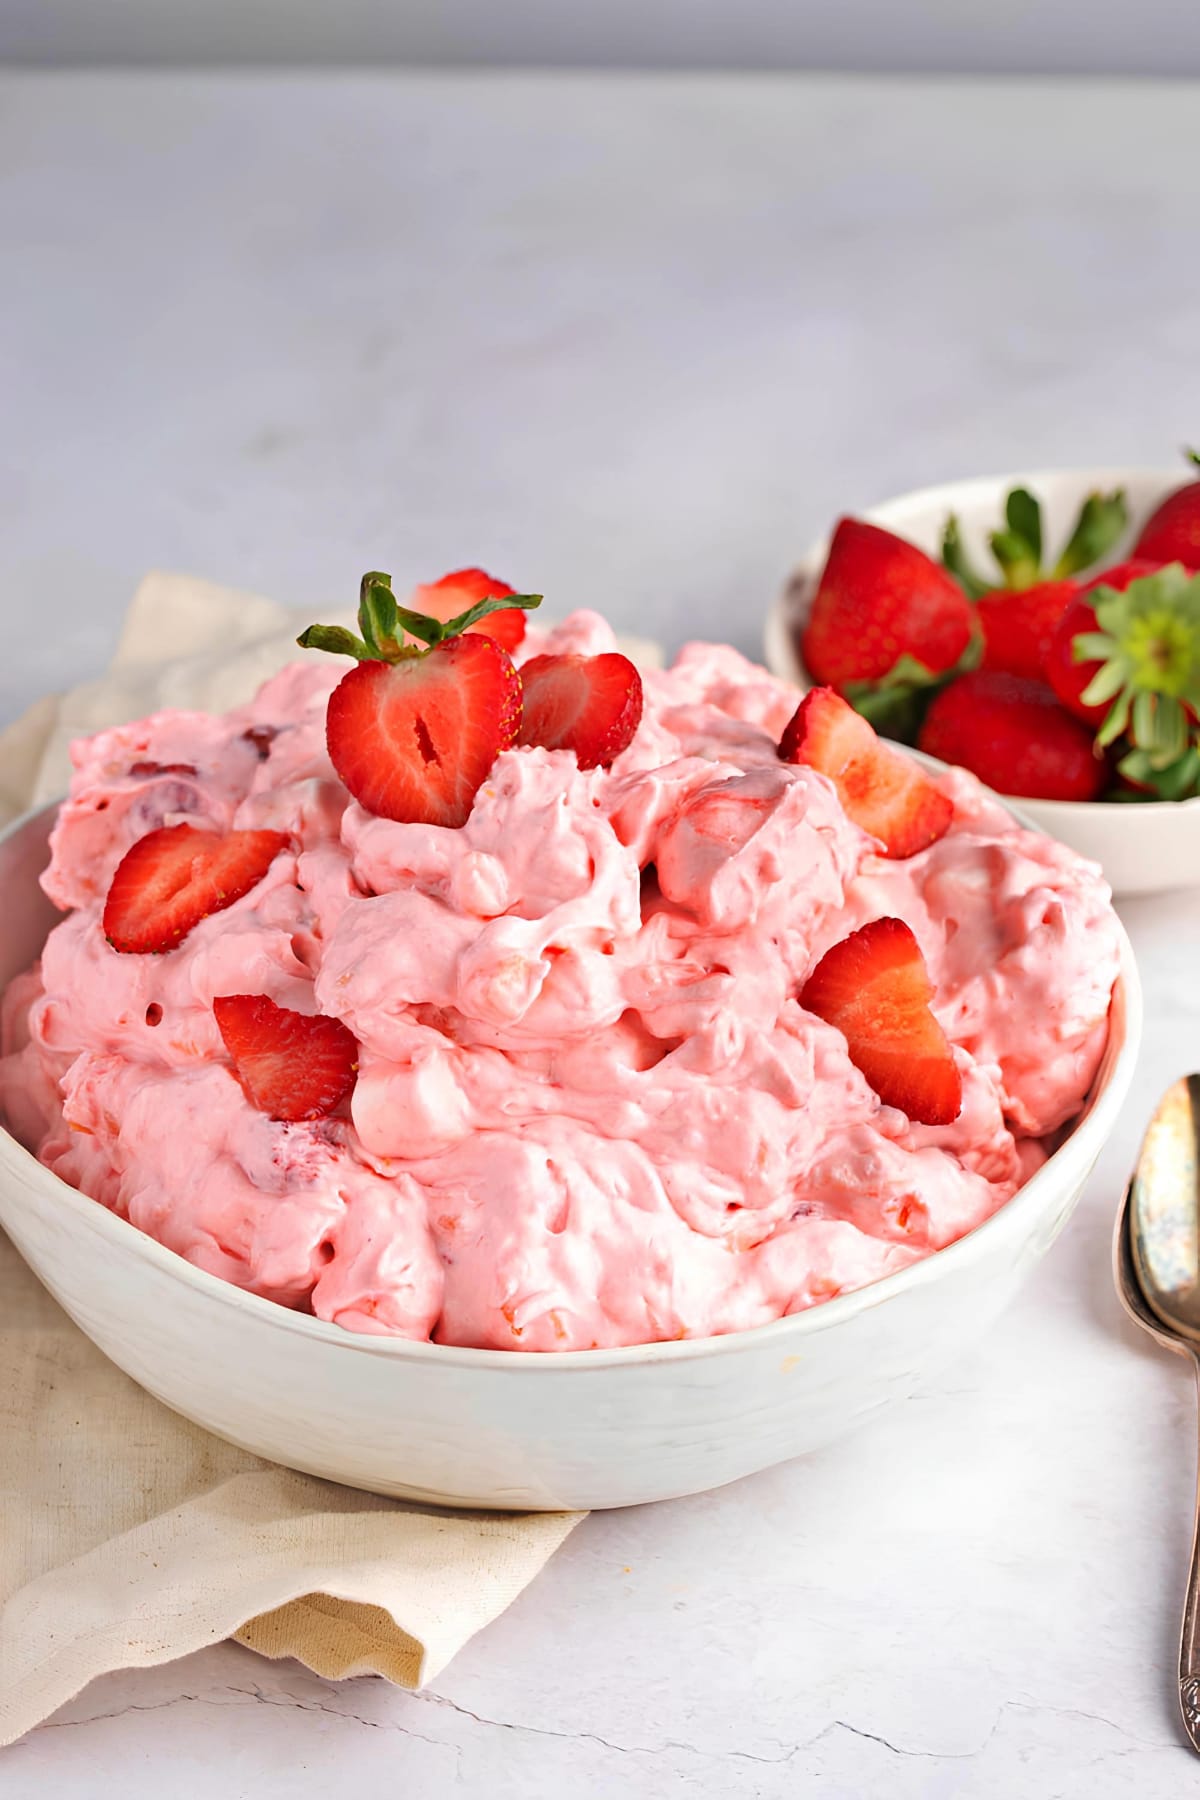 Bowl of Homemade Strawberry Fluff with Fresh Fruits